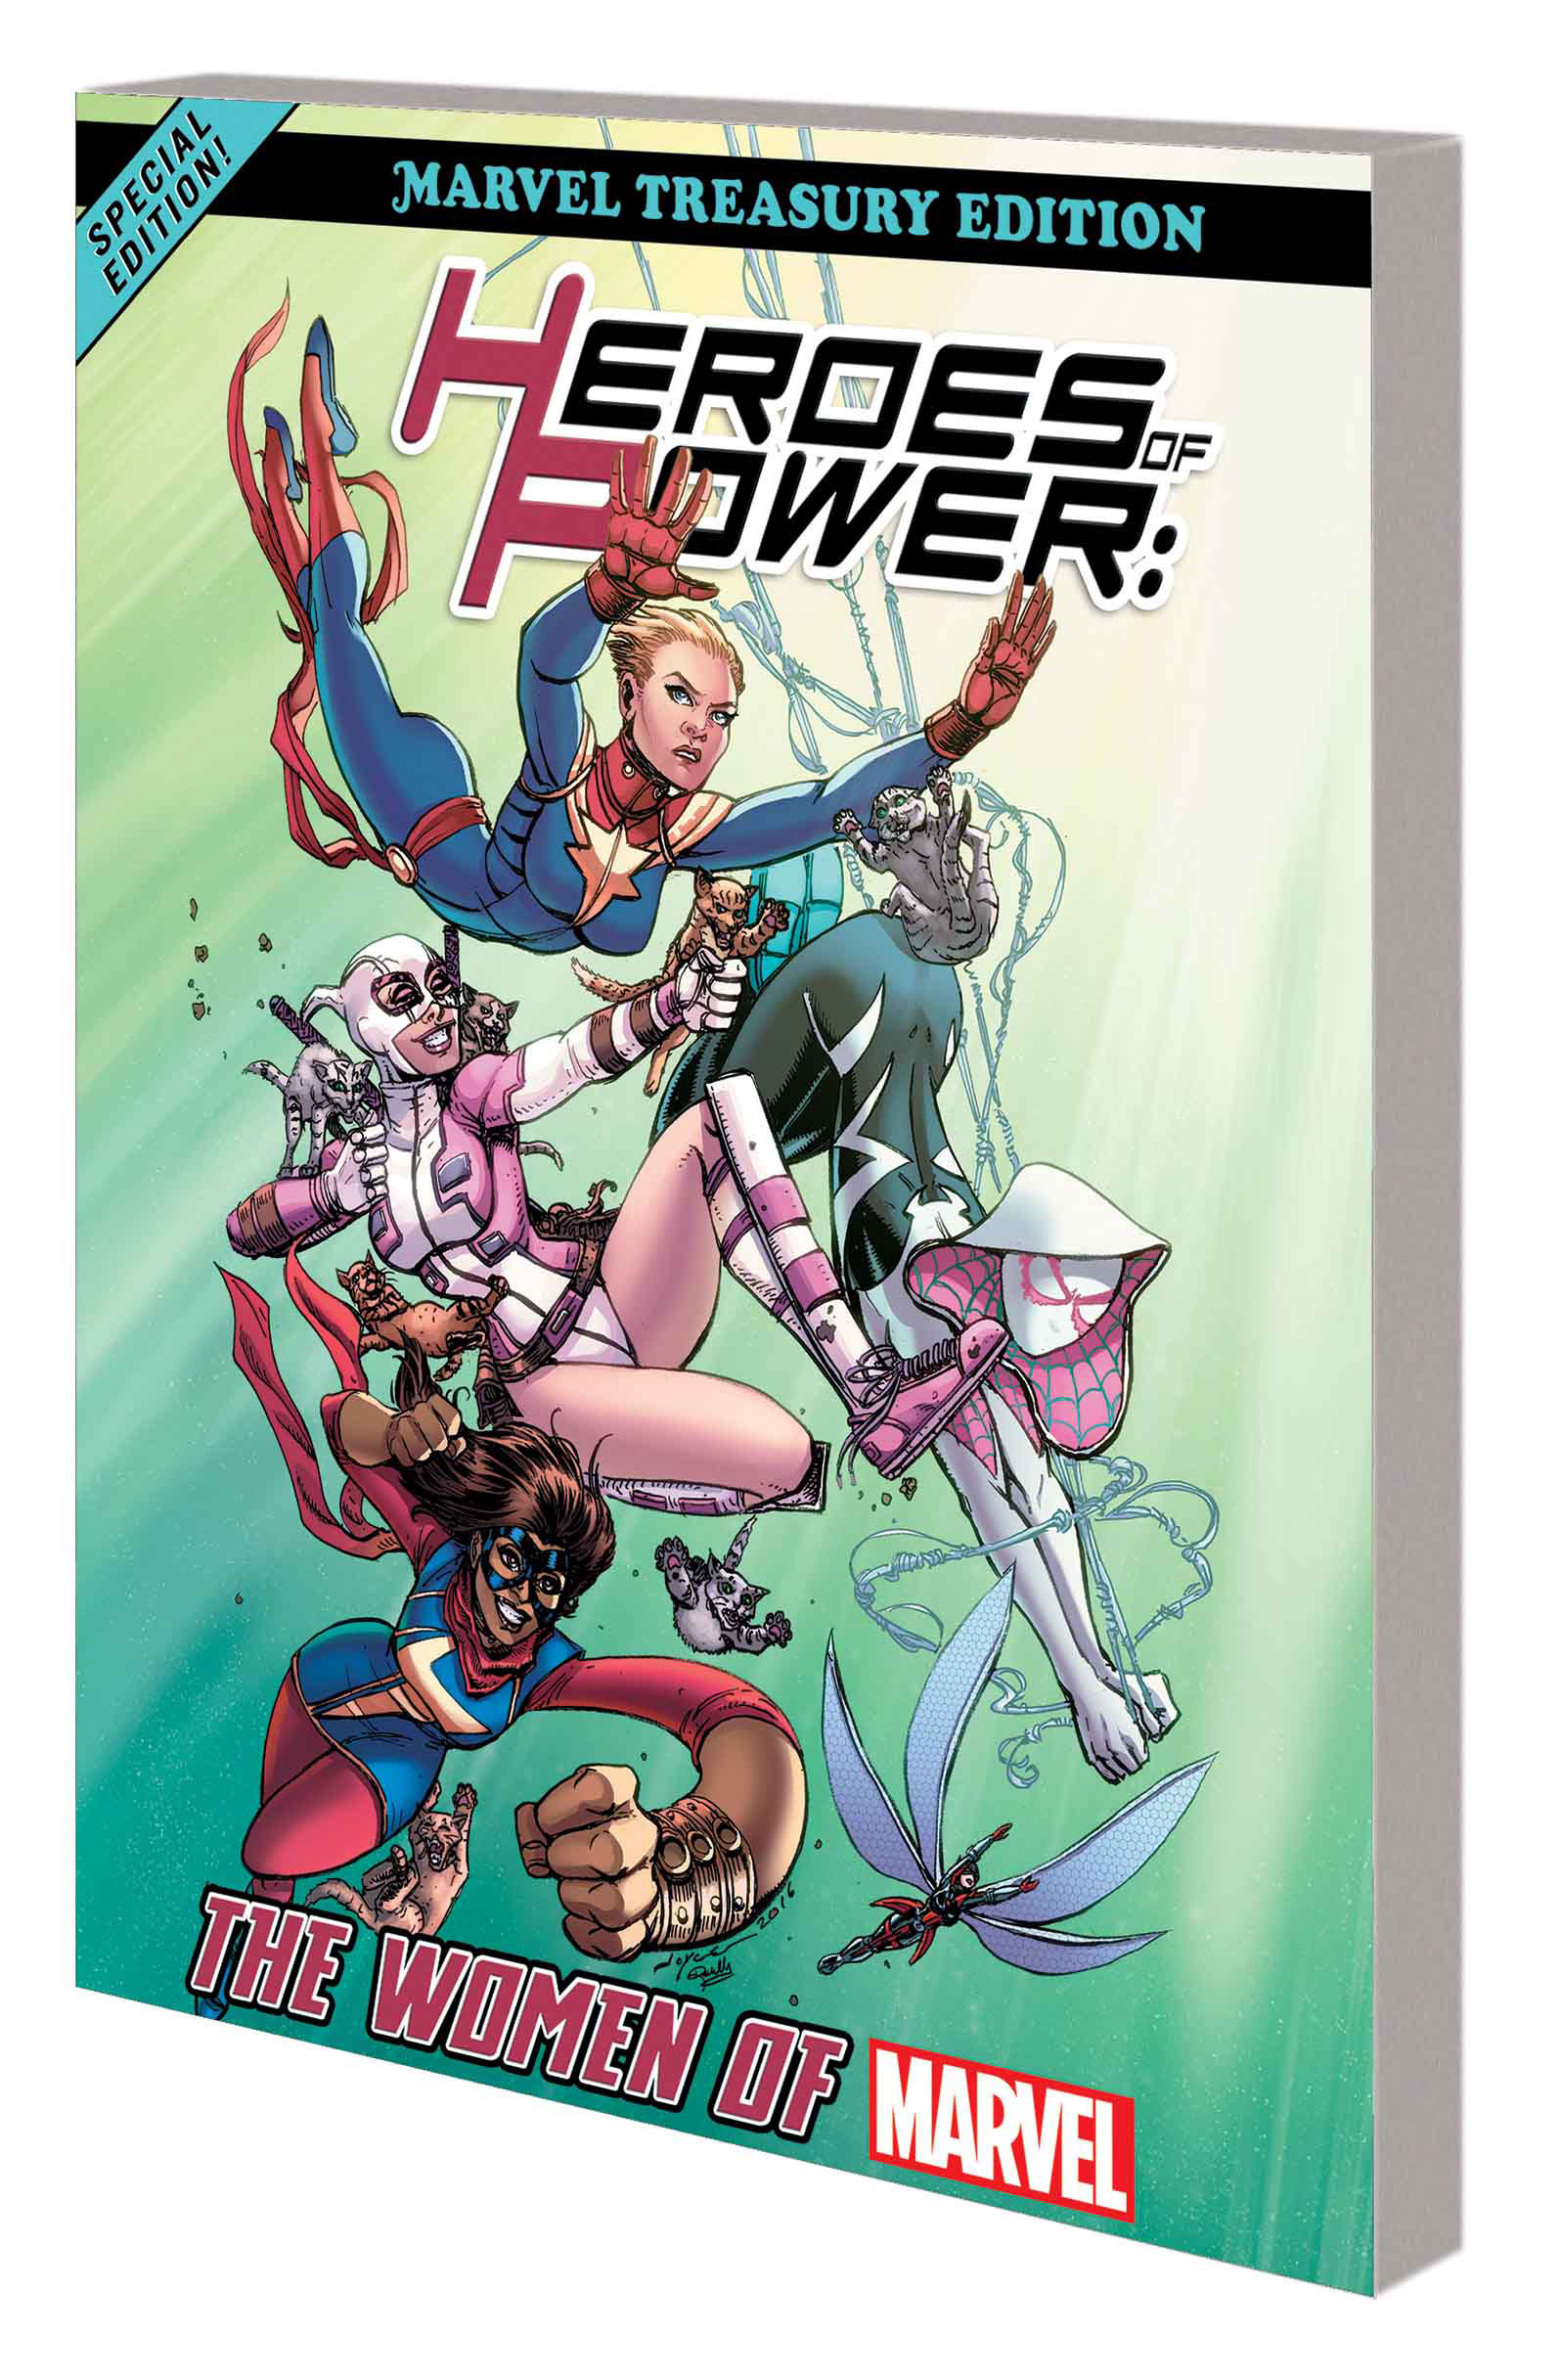 HEROES OF POWER: THE WOMEN OF MARVEL -  ALL-NEW MARVEL TREASURY EDITION TPB